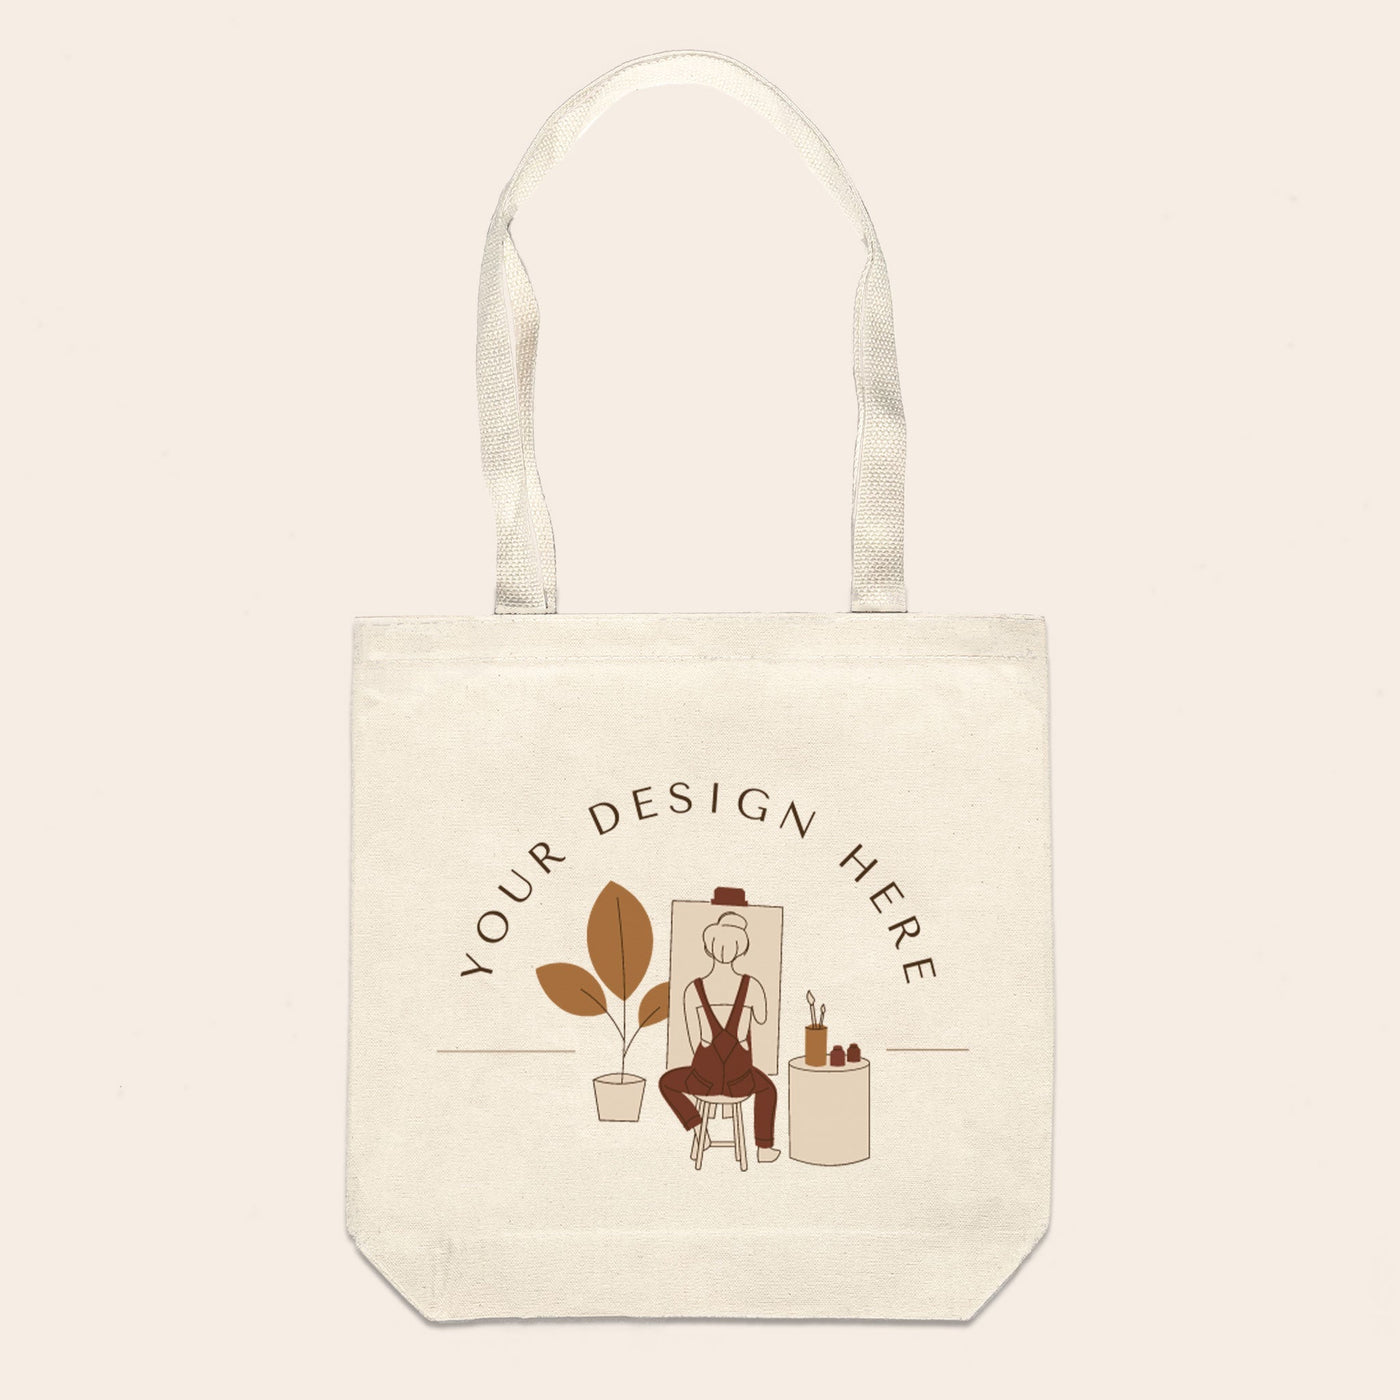 Custom Two Tone Cotton Canvas Tote Bags